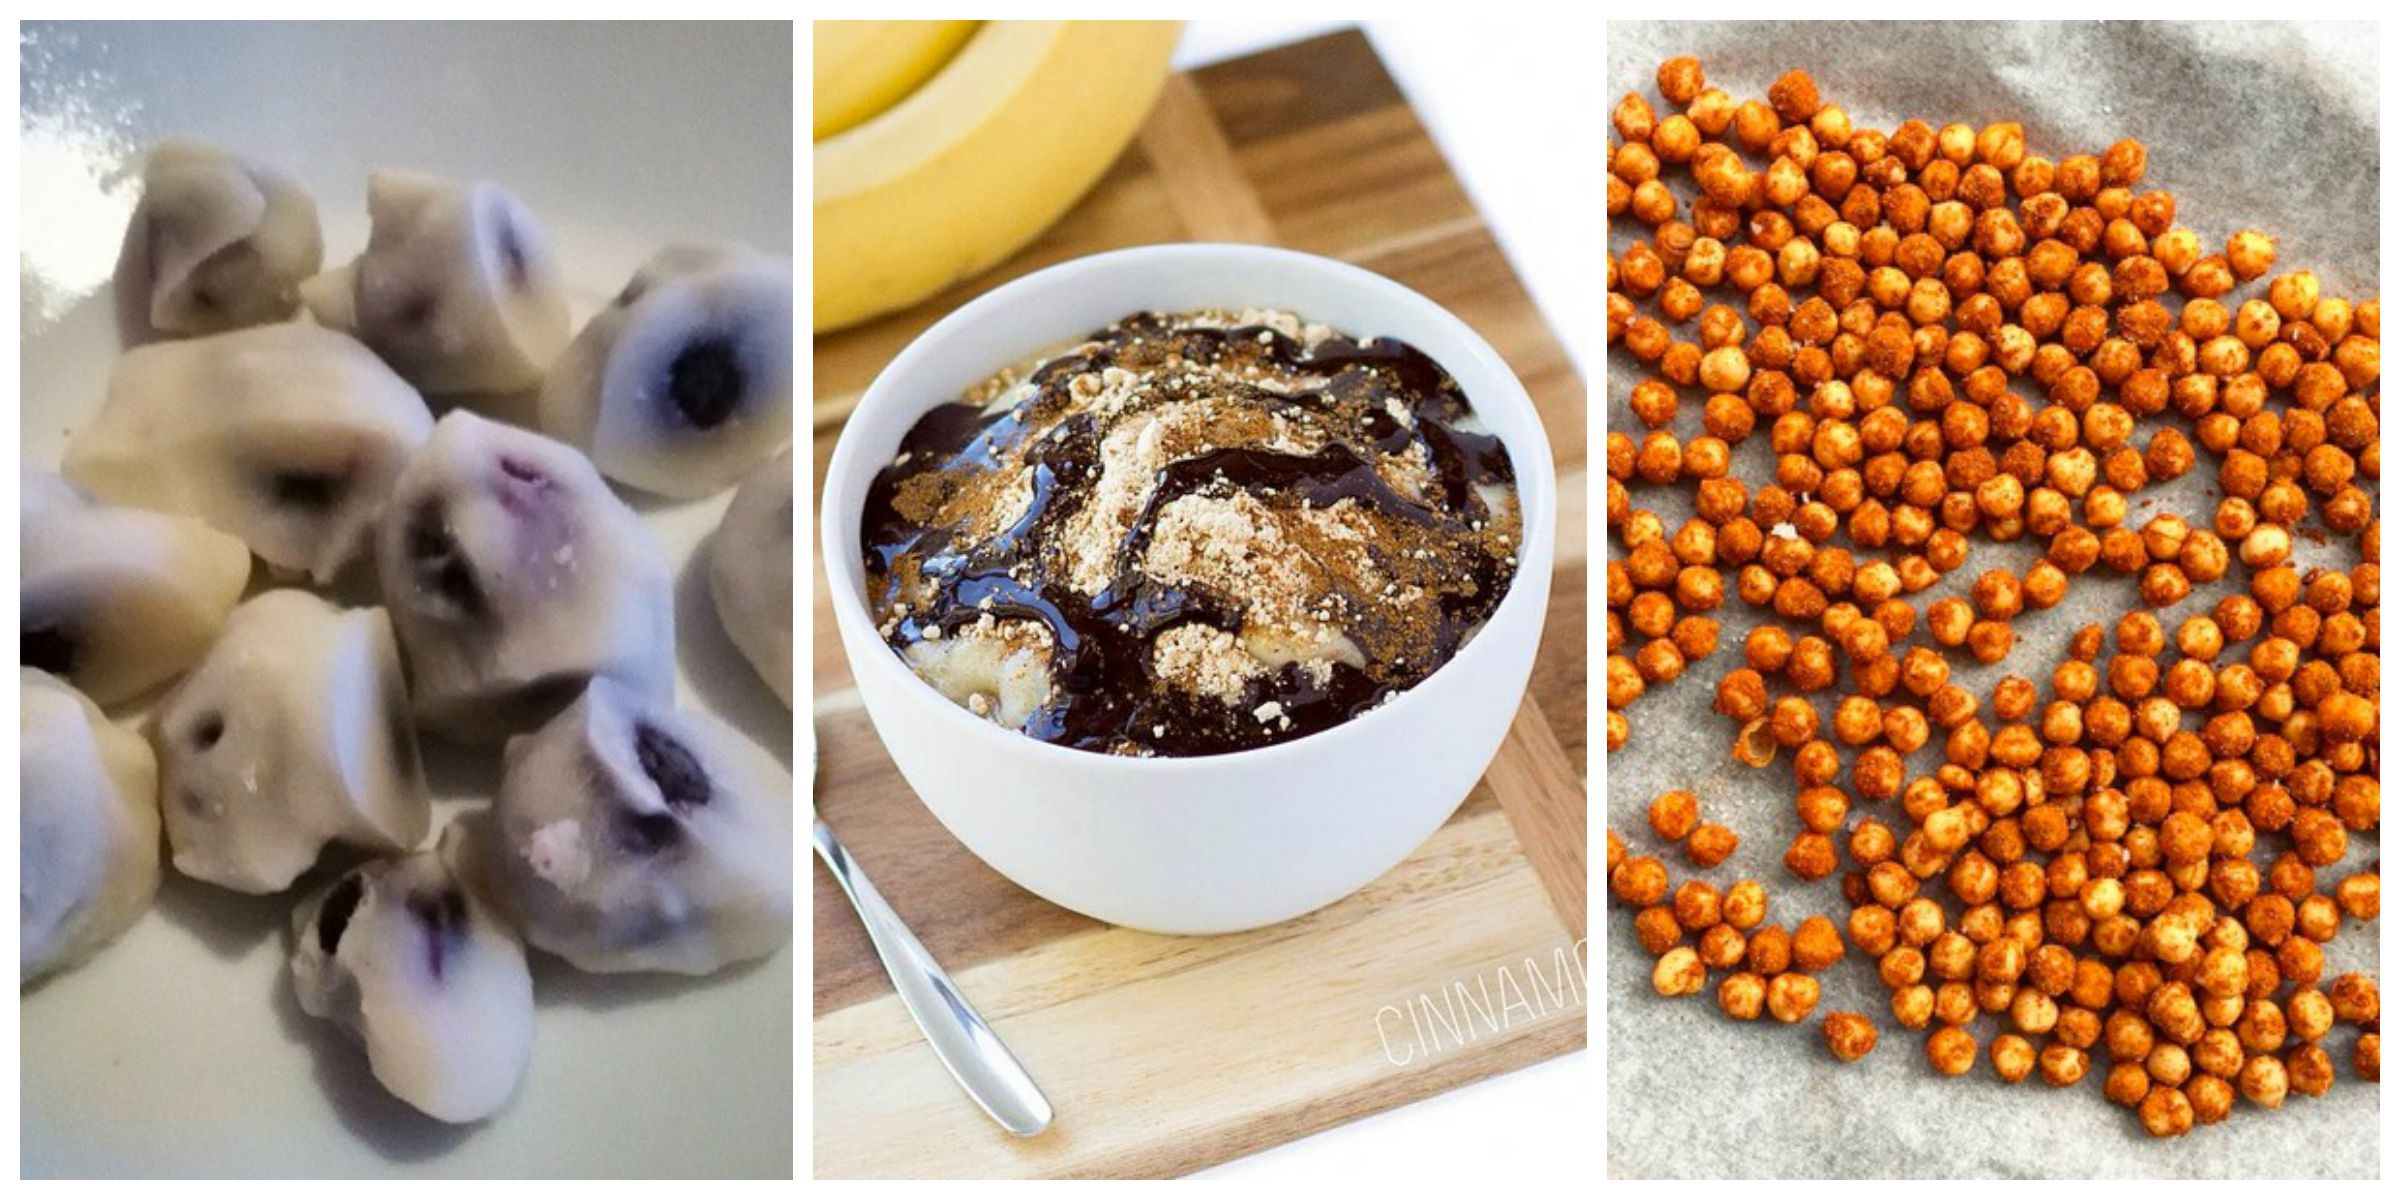 13 lazy girl snacks that require minimal effort and are really good for you